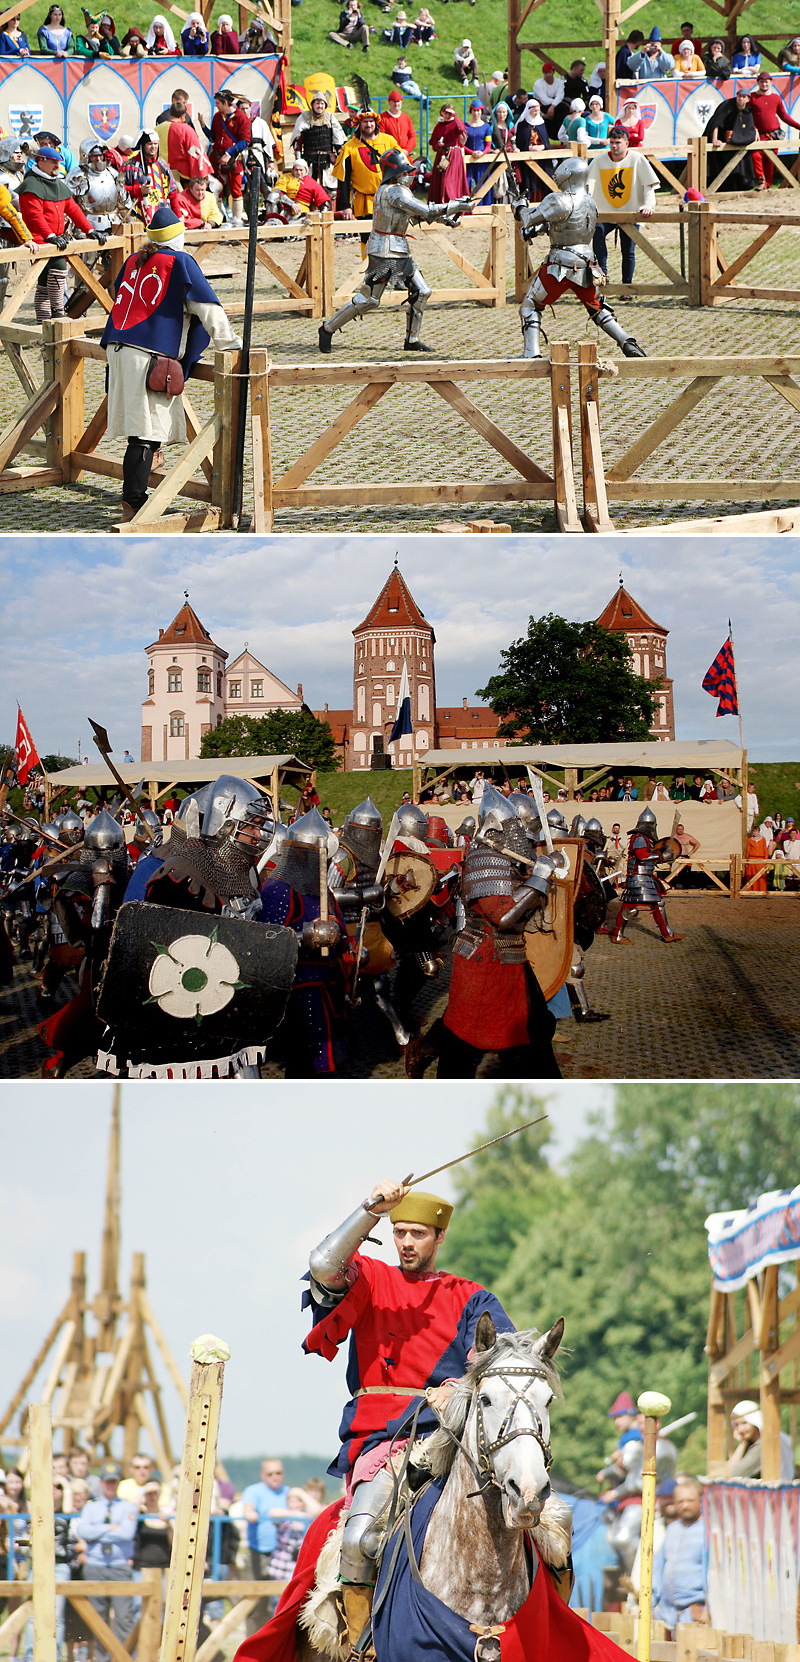 The historical recreation festival Legacy of Centuries in the Mir Castle